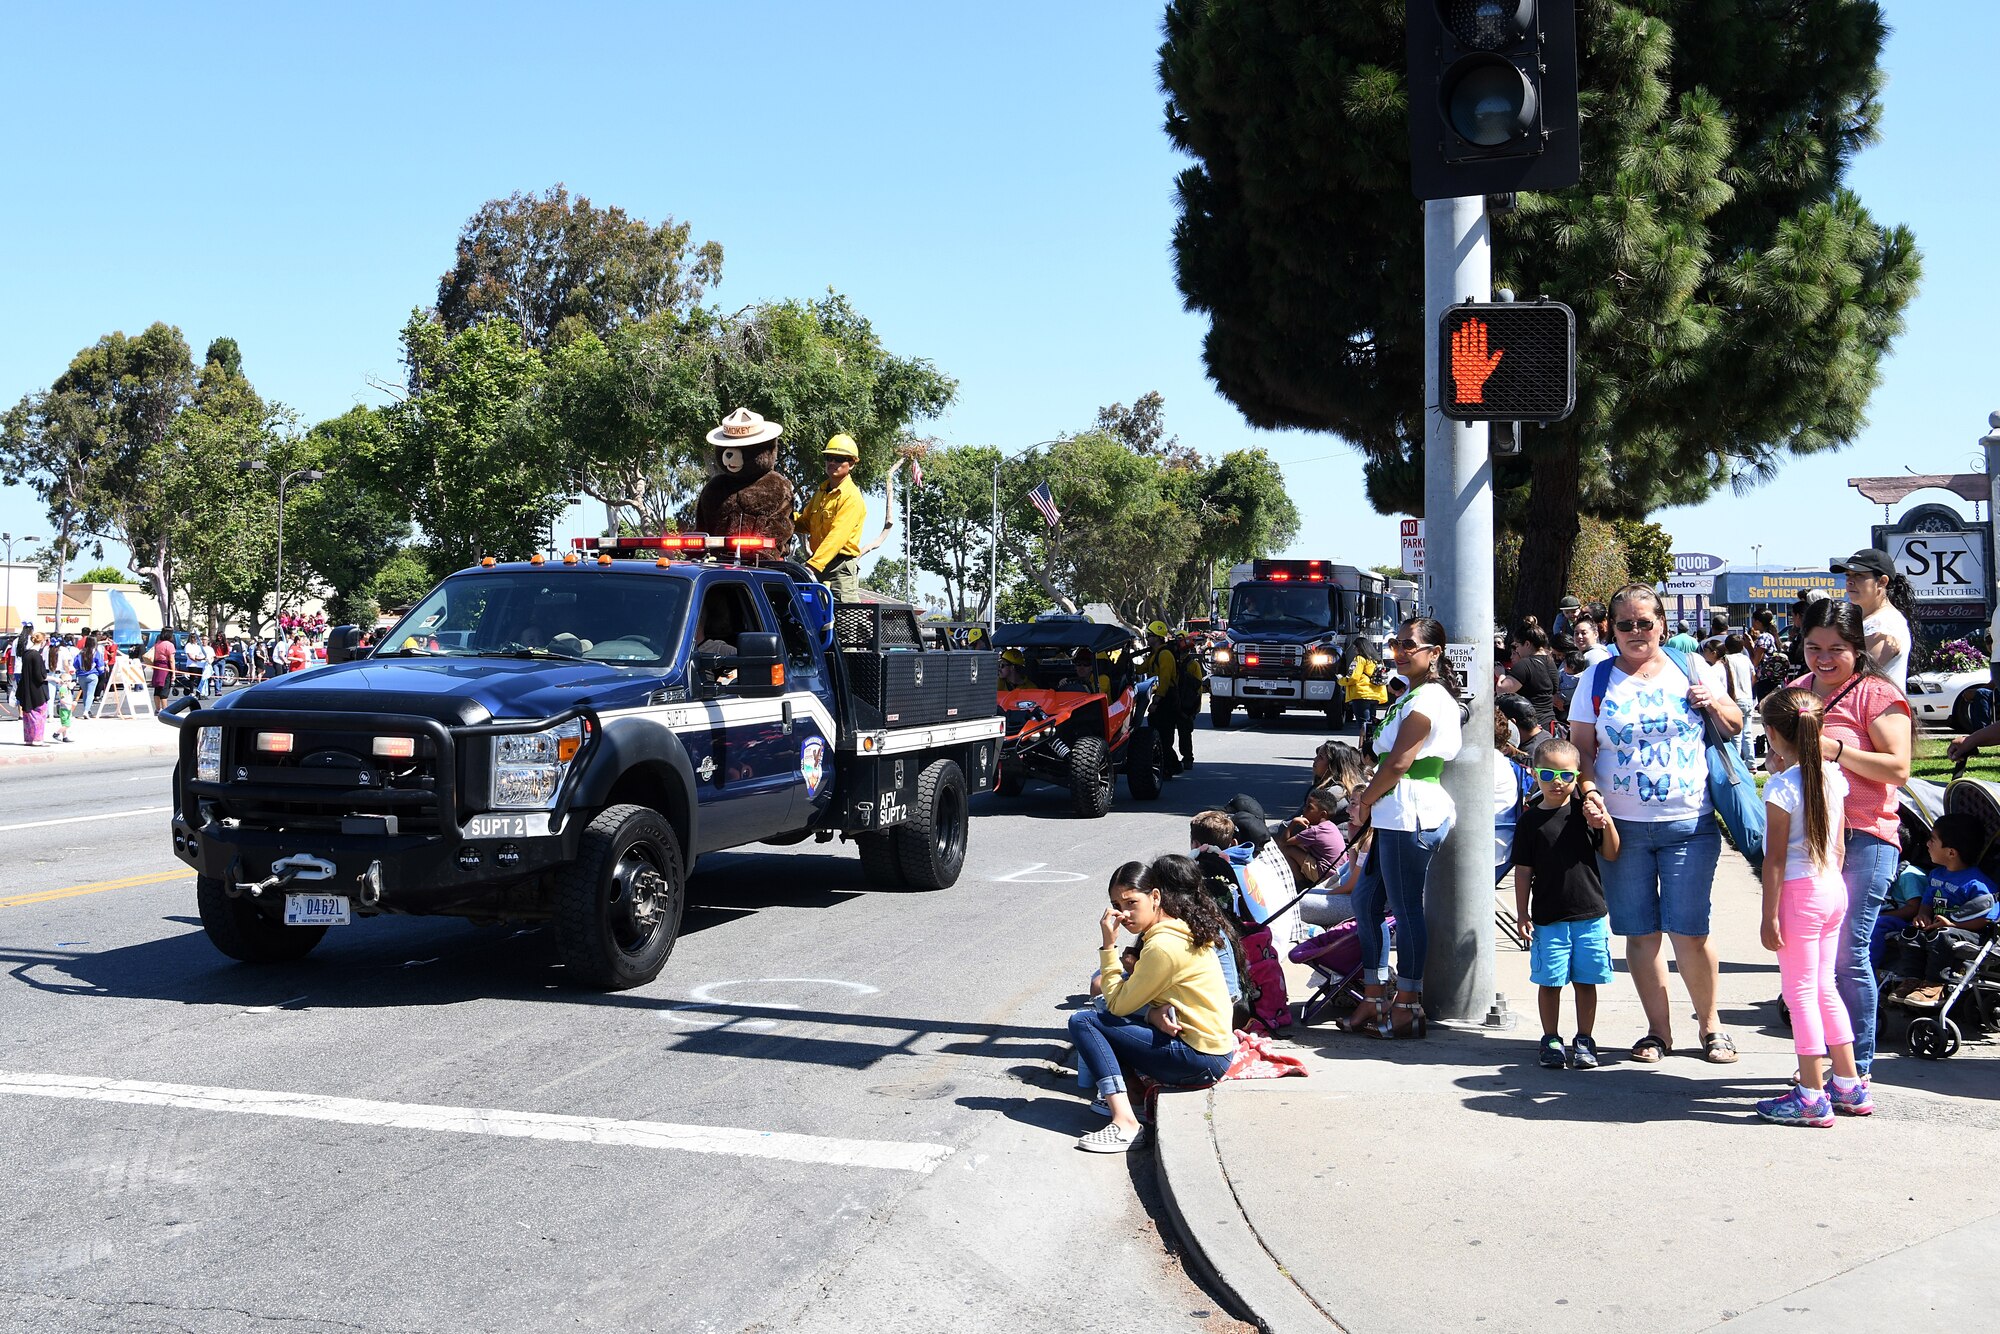 Members of Lompoc participate in the 2019 Lompoc Flower Festival Parade June 29, 2019, in Lompoc, Calif.